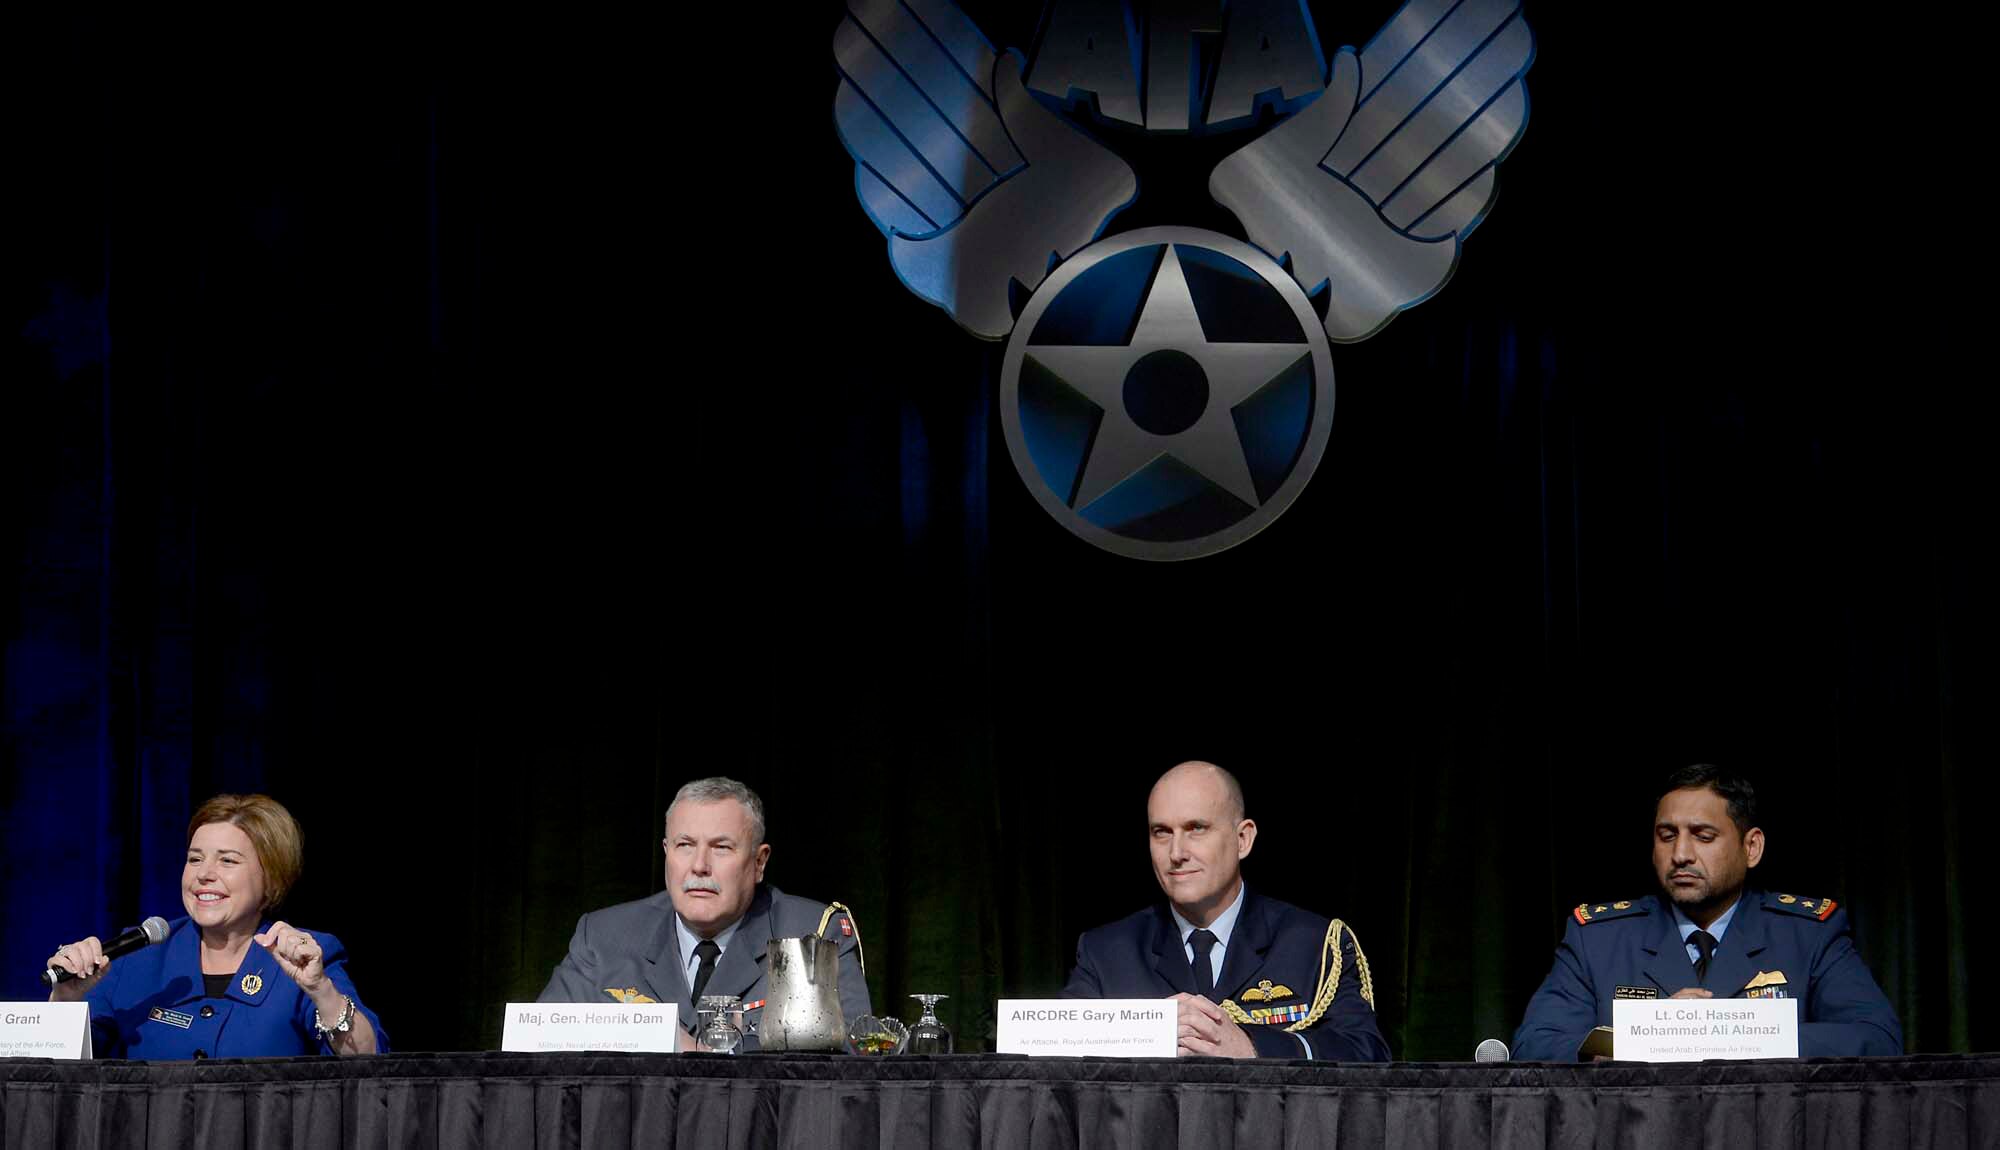 Heidi Grant moderates a panel discussion during the Air Force Association's annual Air Warfare Symposium and Technology Exposition Feb. 12, 2015, in Orlando, Fla. The panel included Maj. Gen. Henrik Dam, from the Royal Danish air force; Air Commodore Gary Martin, from the Royal Australian air force; and Lt. Col. Hassan Mohammed Ali Alanazi, from the United Arab Emirates air force. Grant is the deputy under secretary of the Air Force, International Affairs. (U.S. Air Force photo/Scott M. Ash) 